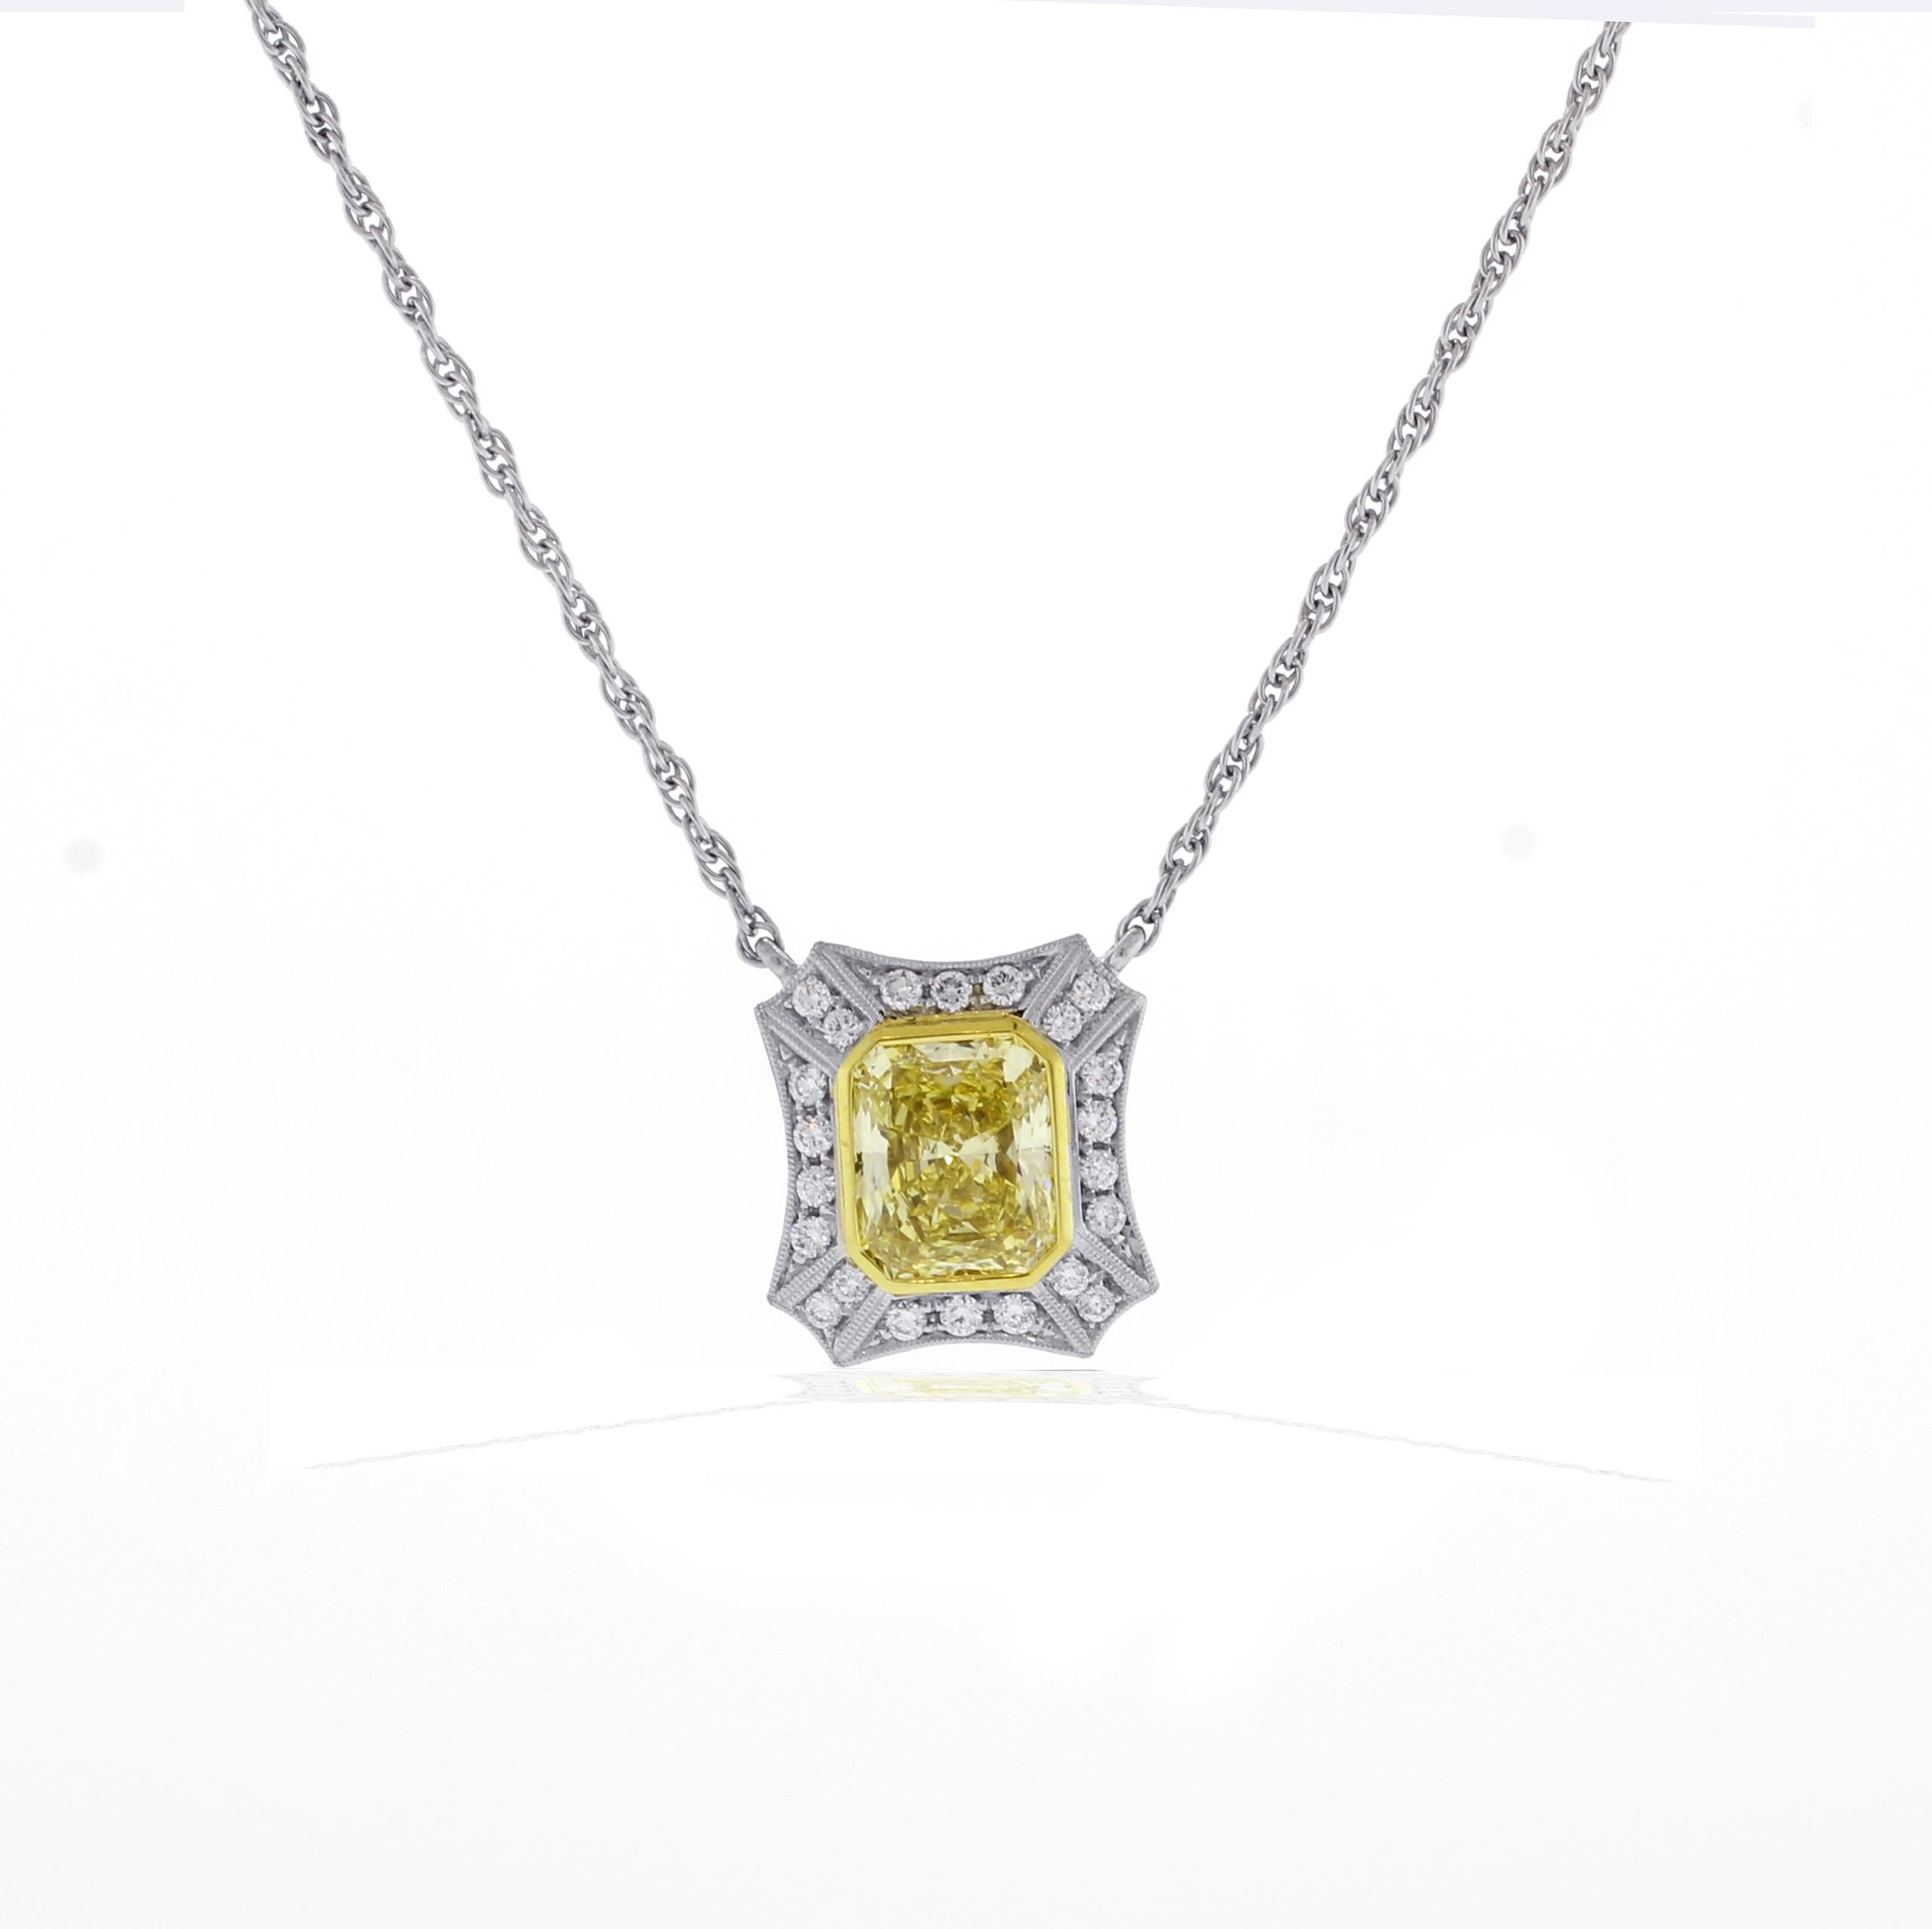 From the master jewelers of Pampillonia, this highly prized natural fancy yellow Radiant cut diamond weighing 2.46 carats. The diamond rests in a handmade platinum micro  pave setting with an additional twenty two brilliant cut diamonds. GIA gem